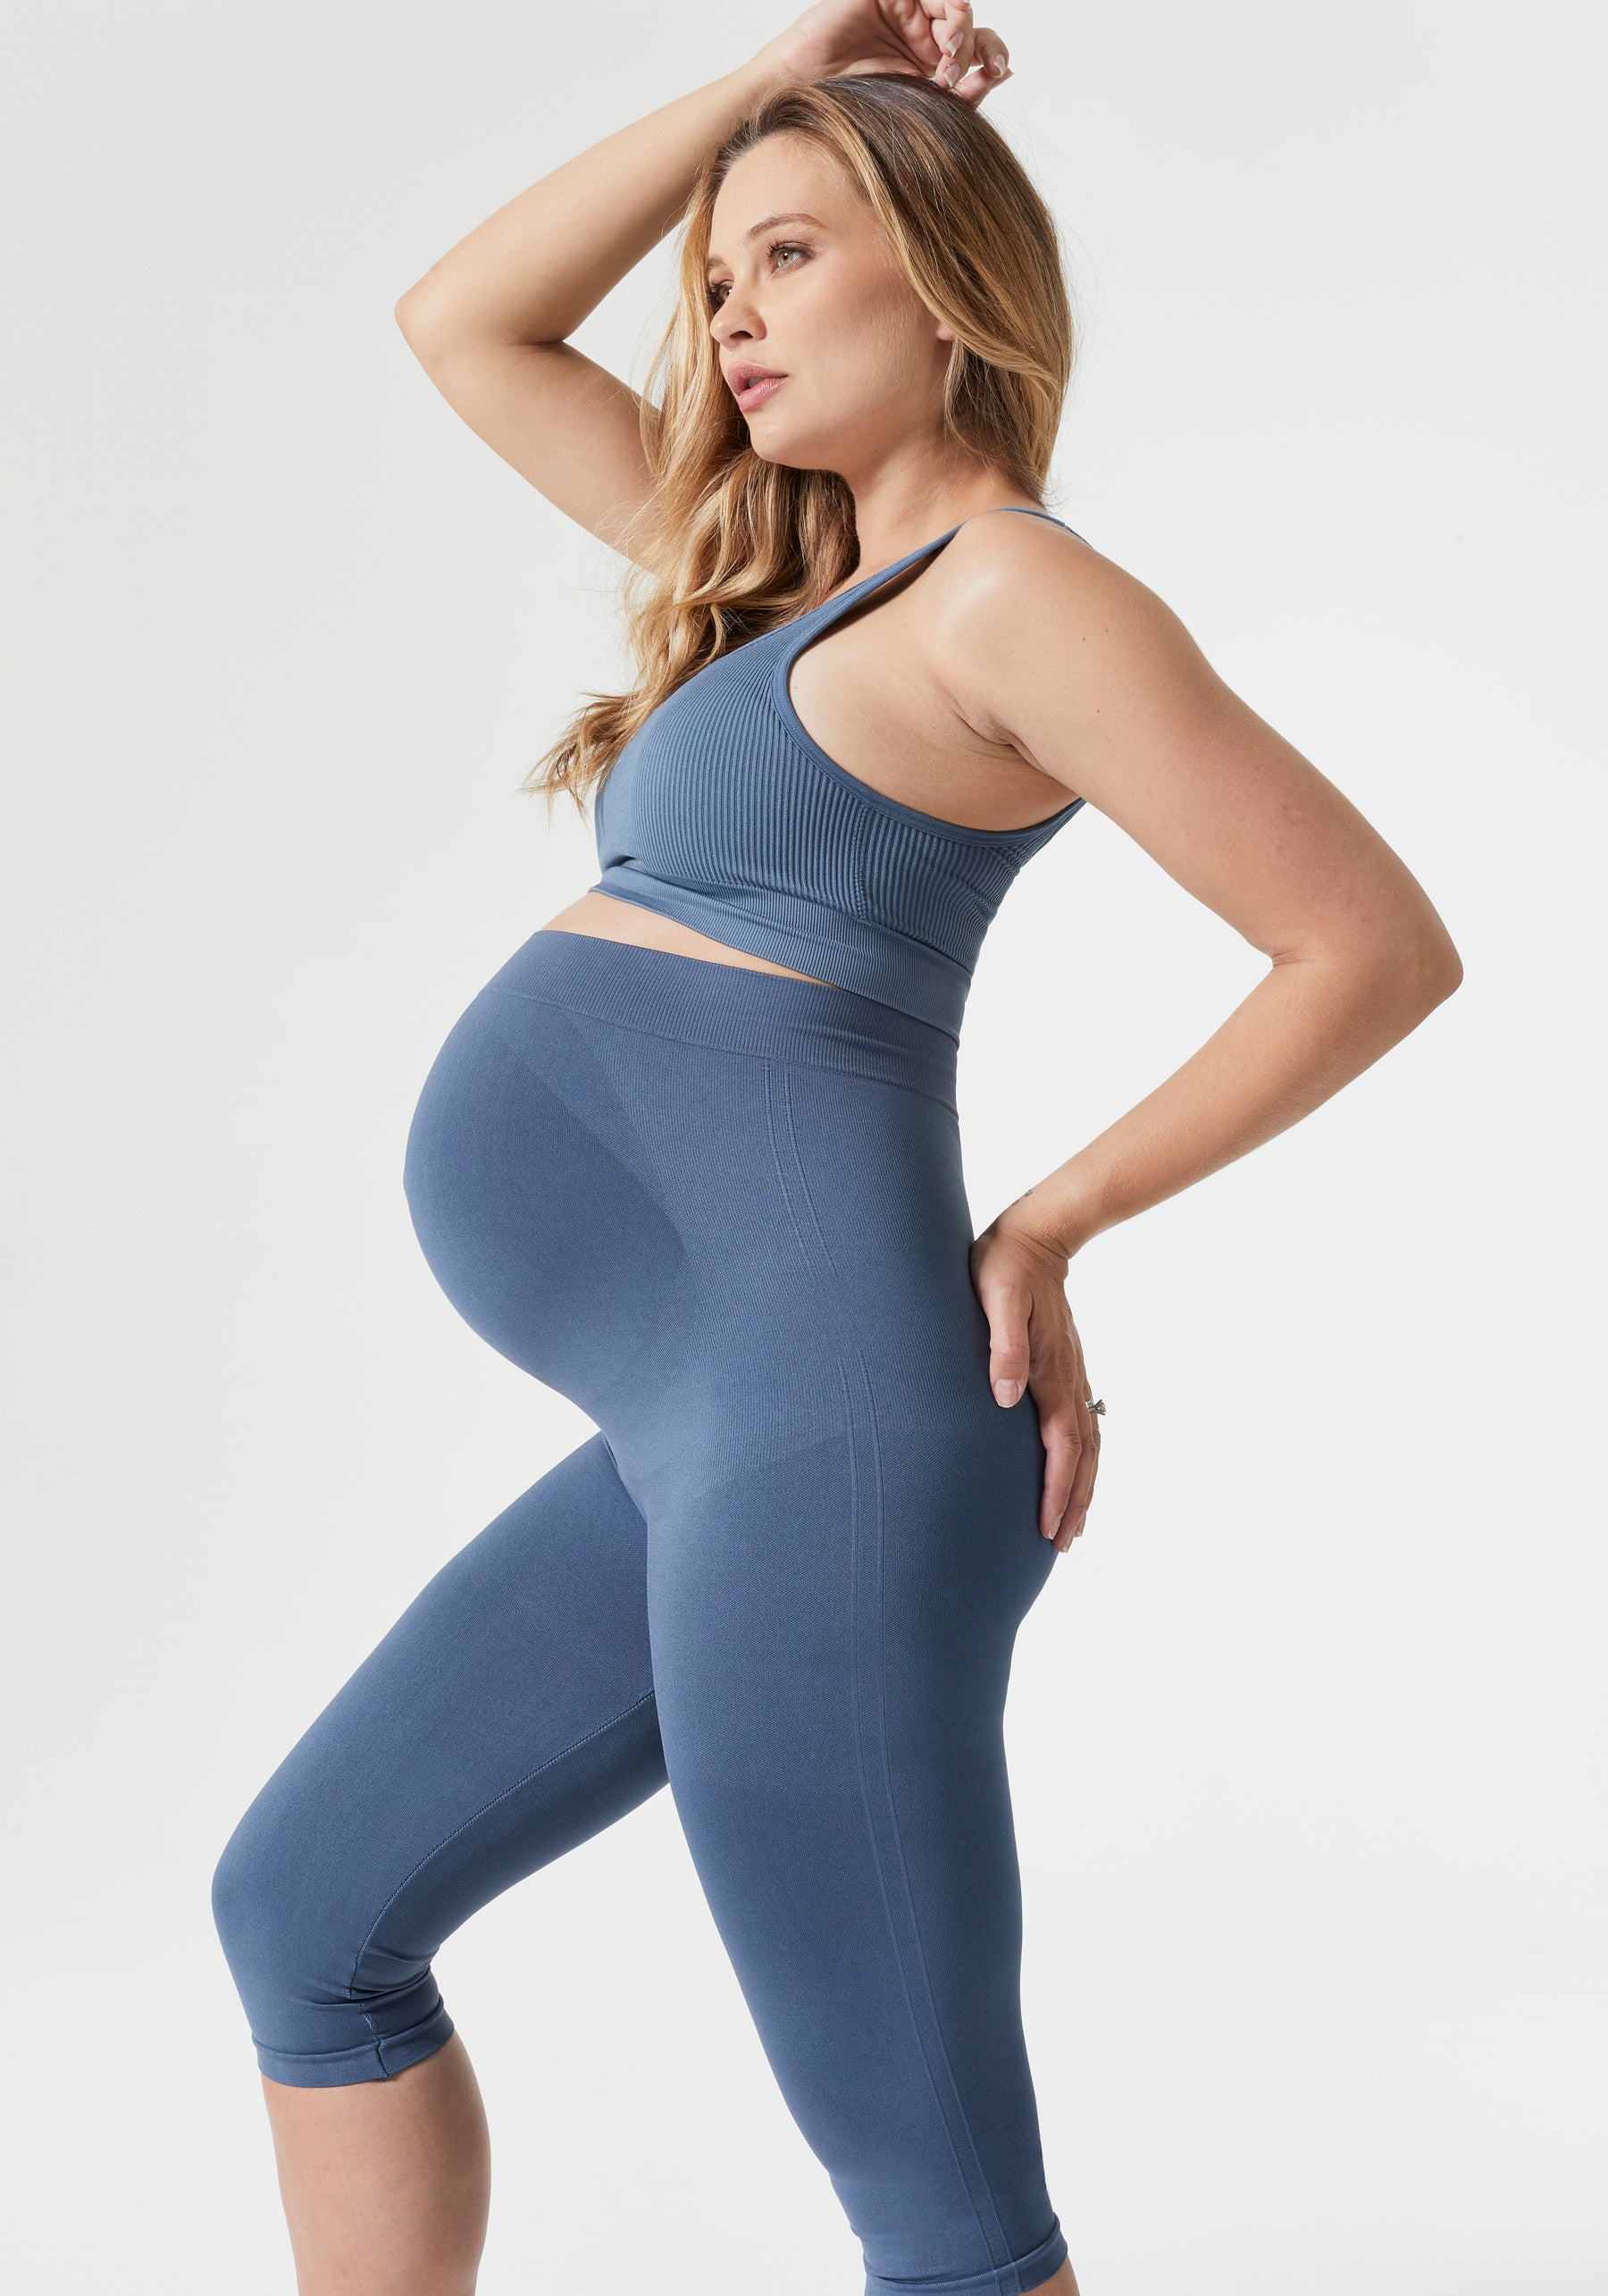  KVIBEO High Waisted Thick Maternity Leggings for